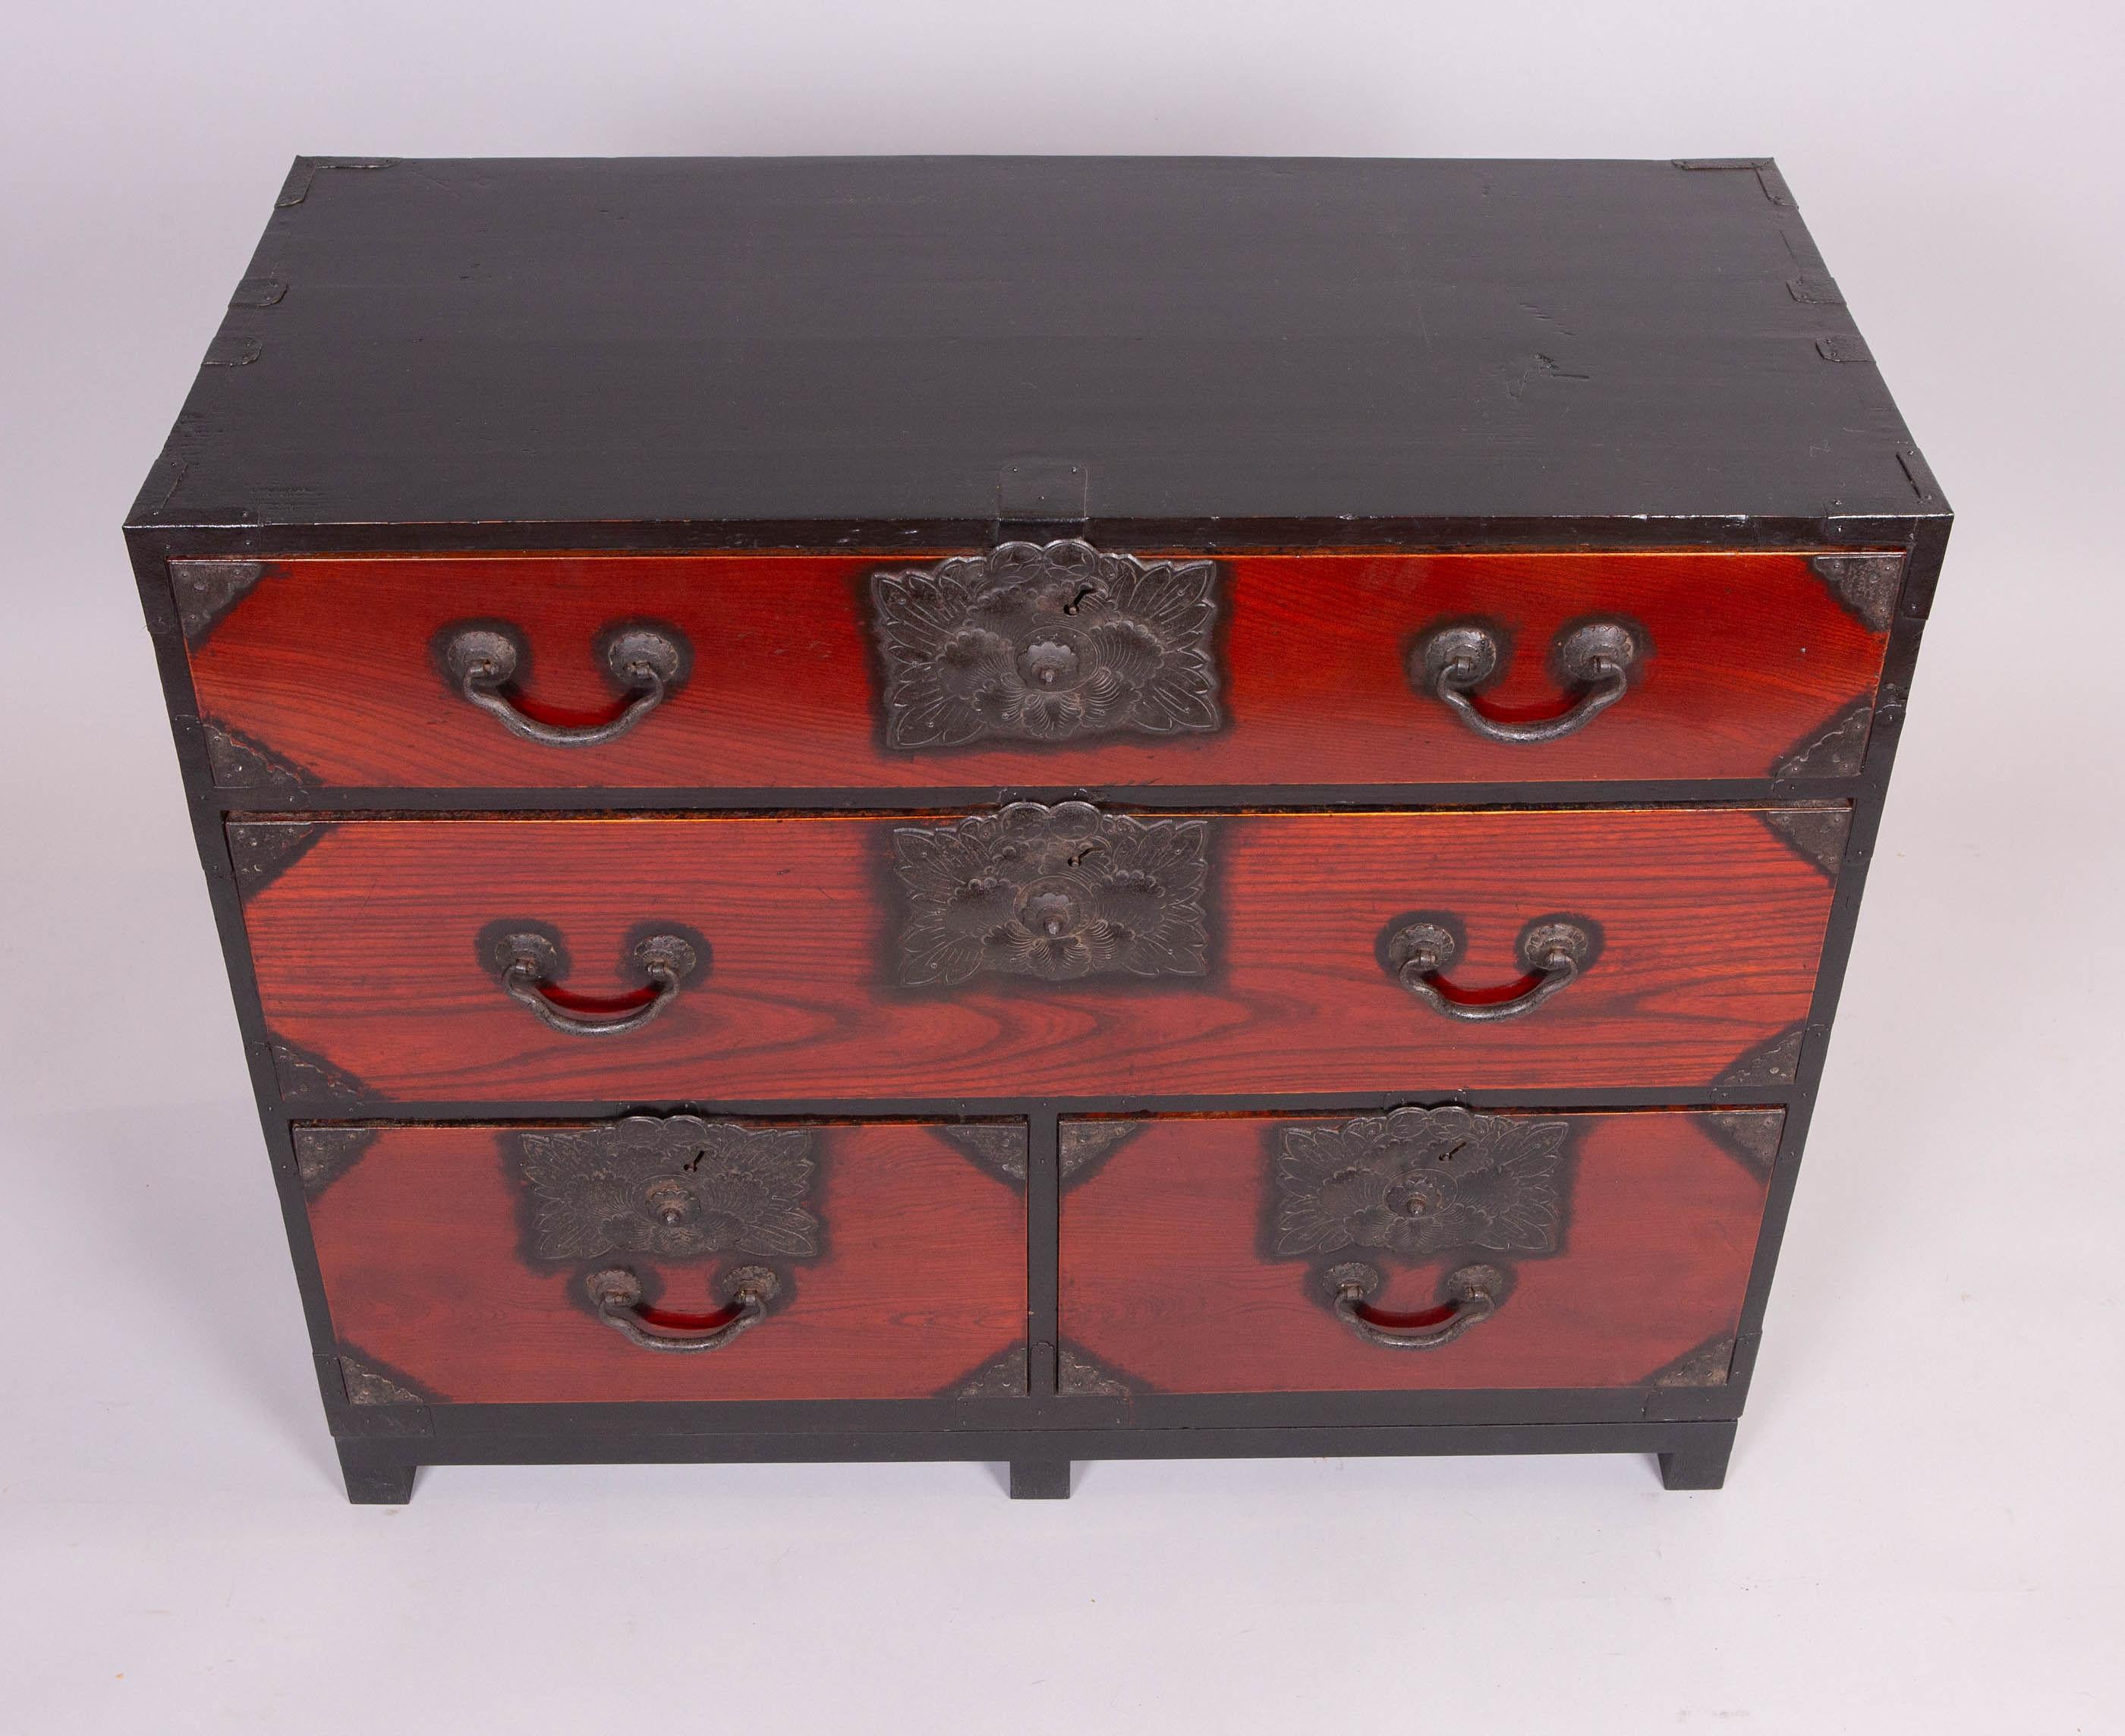 With keyaki wood drawers (a treasured wood in Japan), early hardware, ebonized top and sides.  Comes on a 3